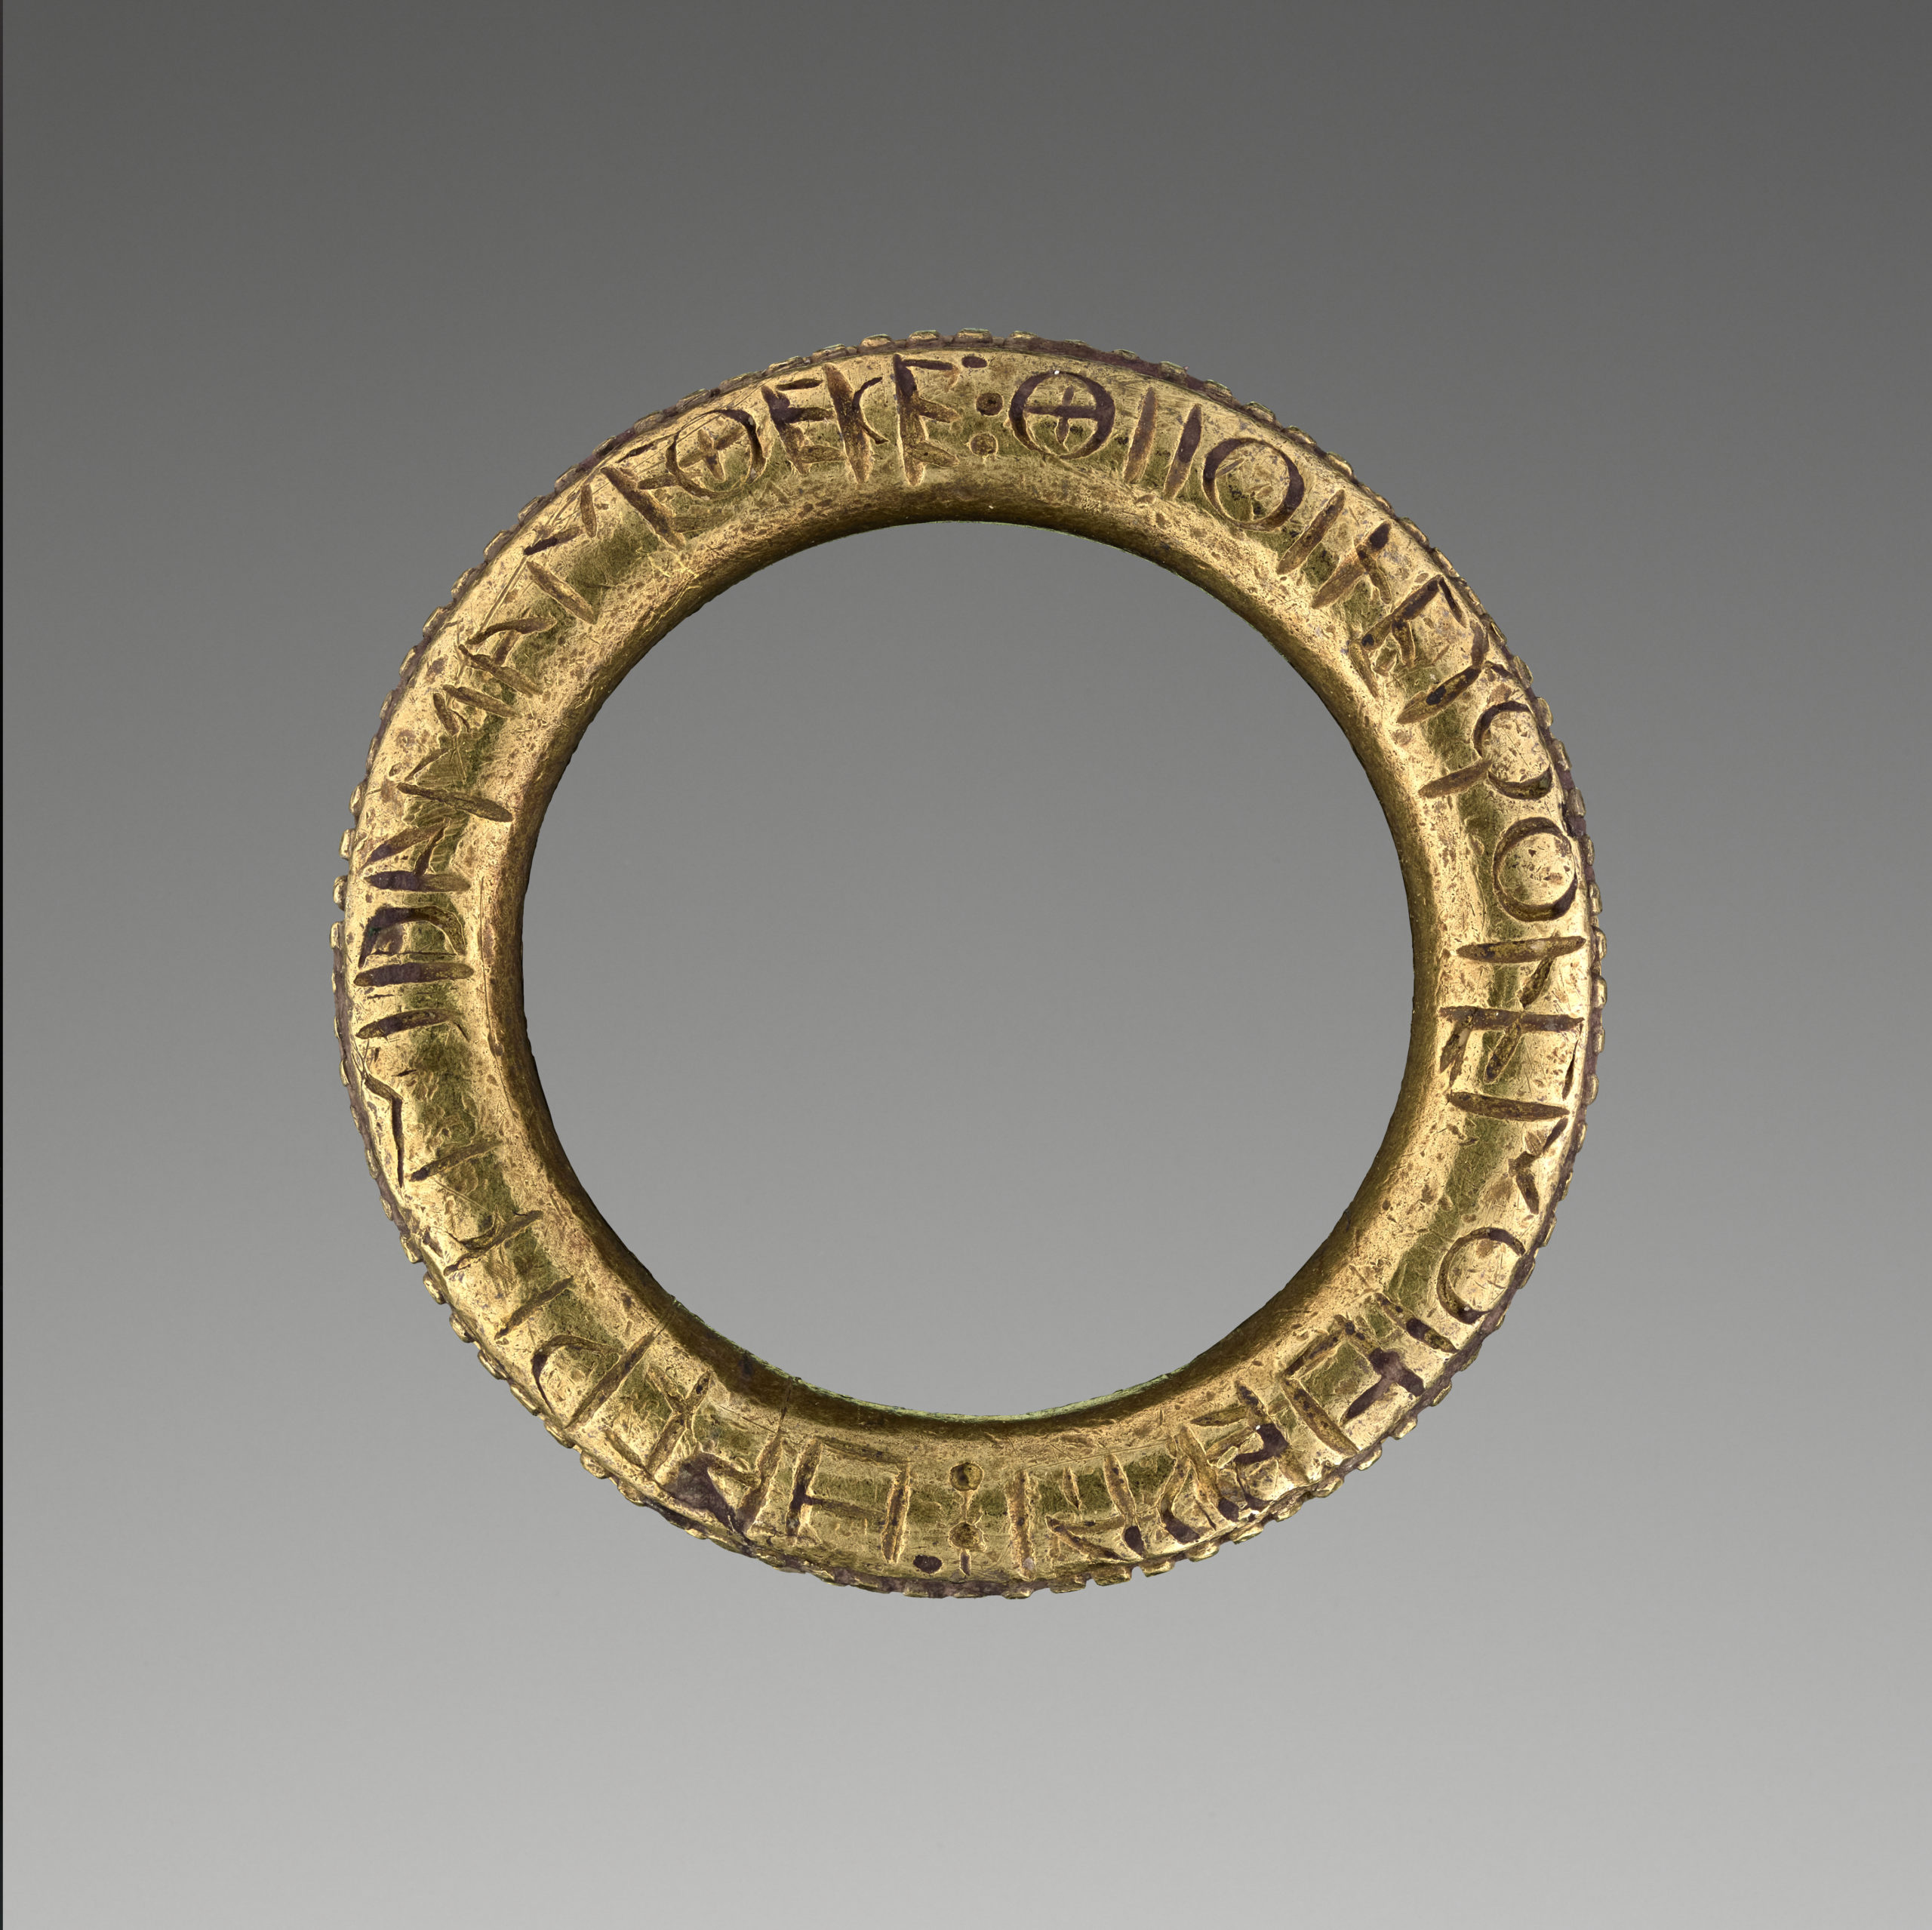 A gold ring with an inscription in Greek.